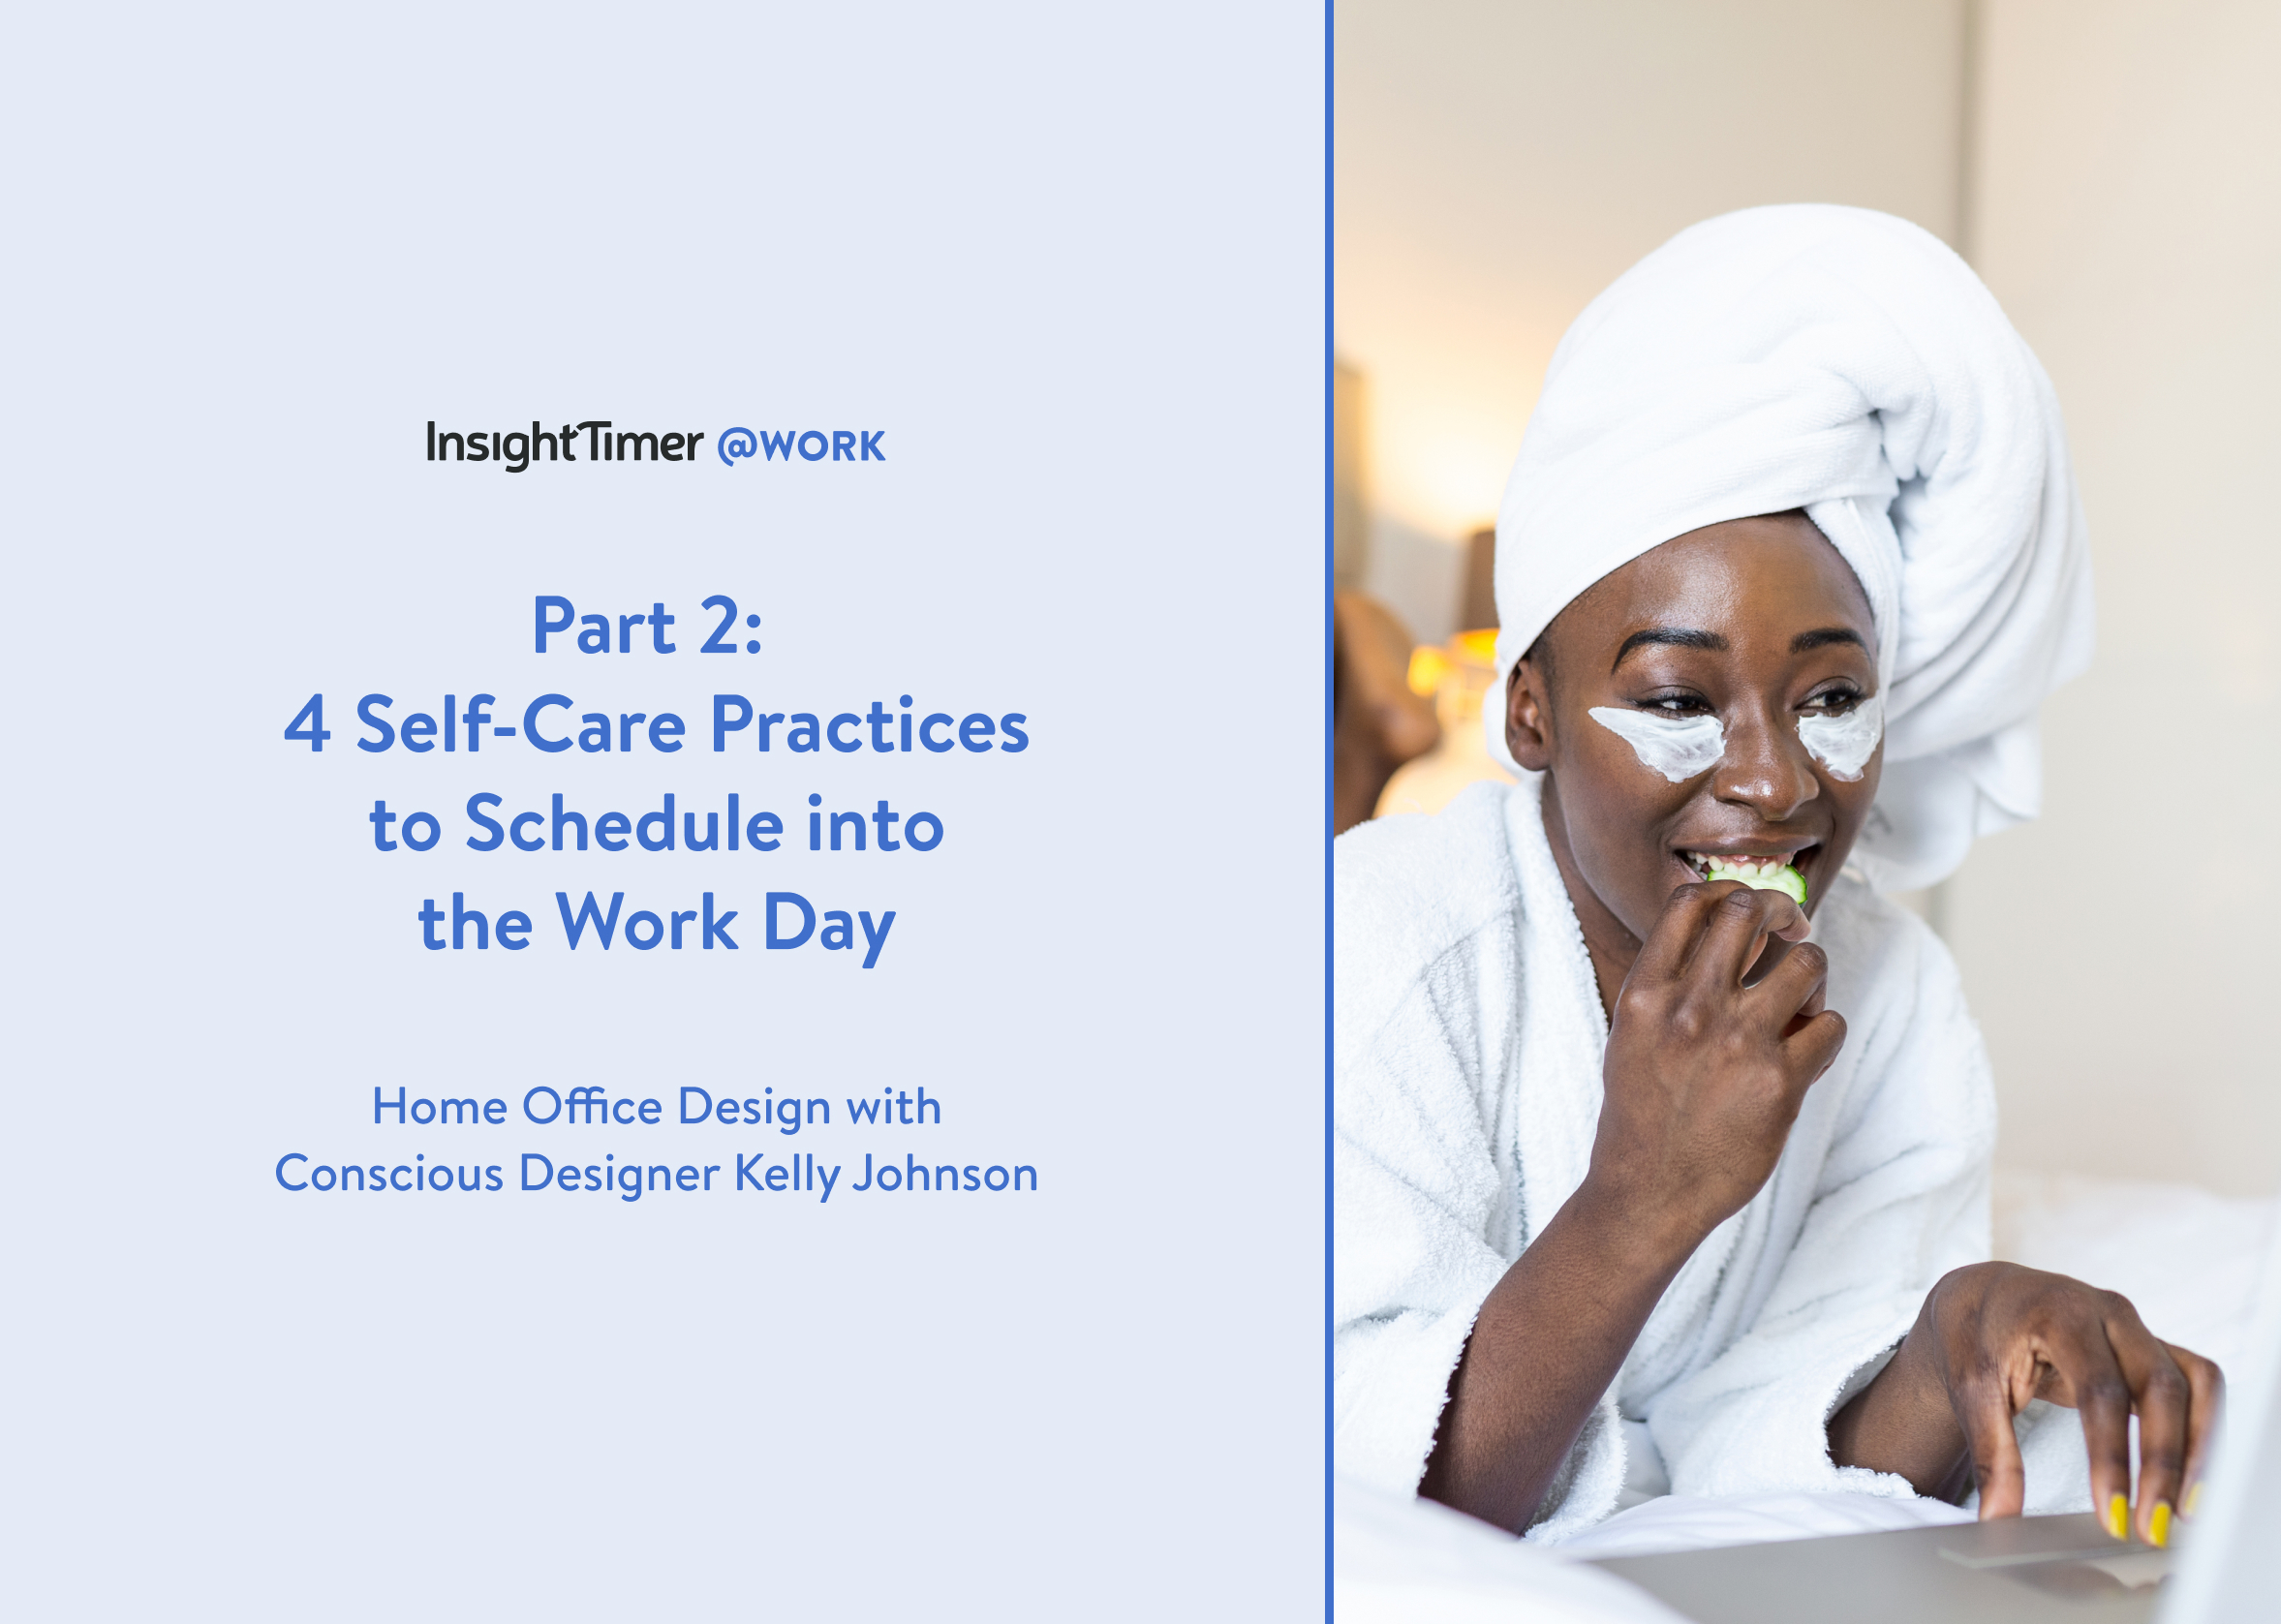 4 Self-Care Practices to Schedule into the Work Day